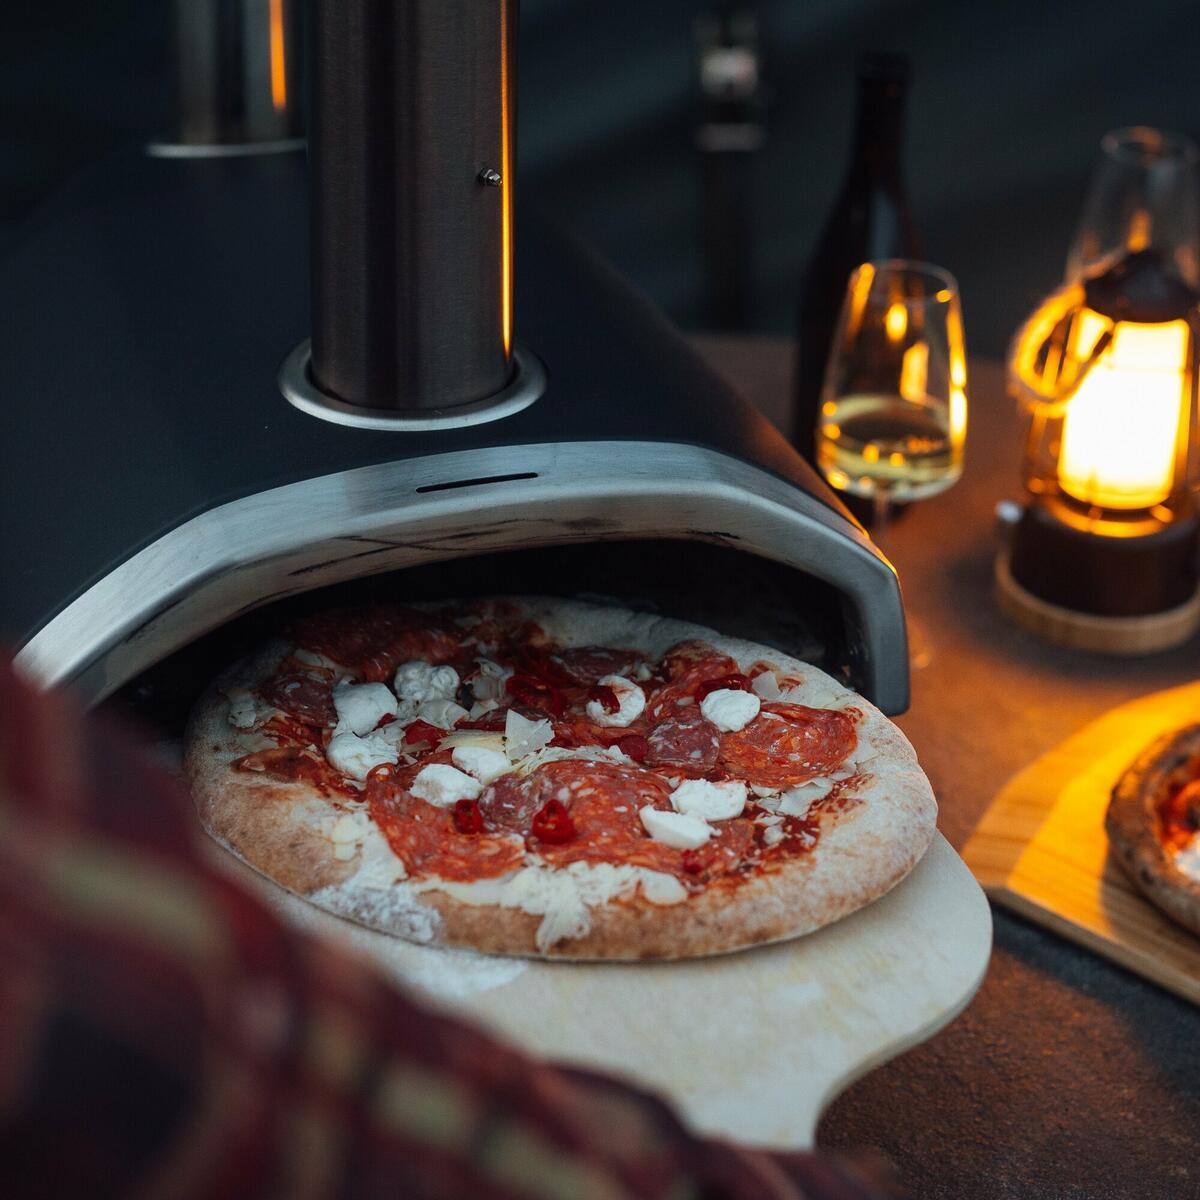 Hire your own pizza oven and kit